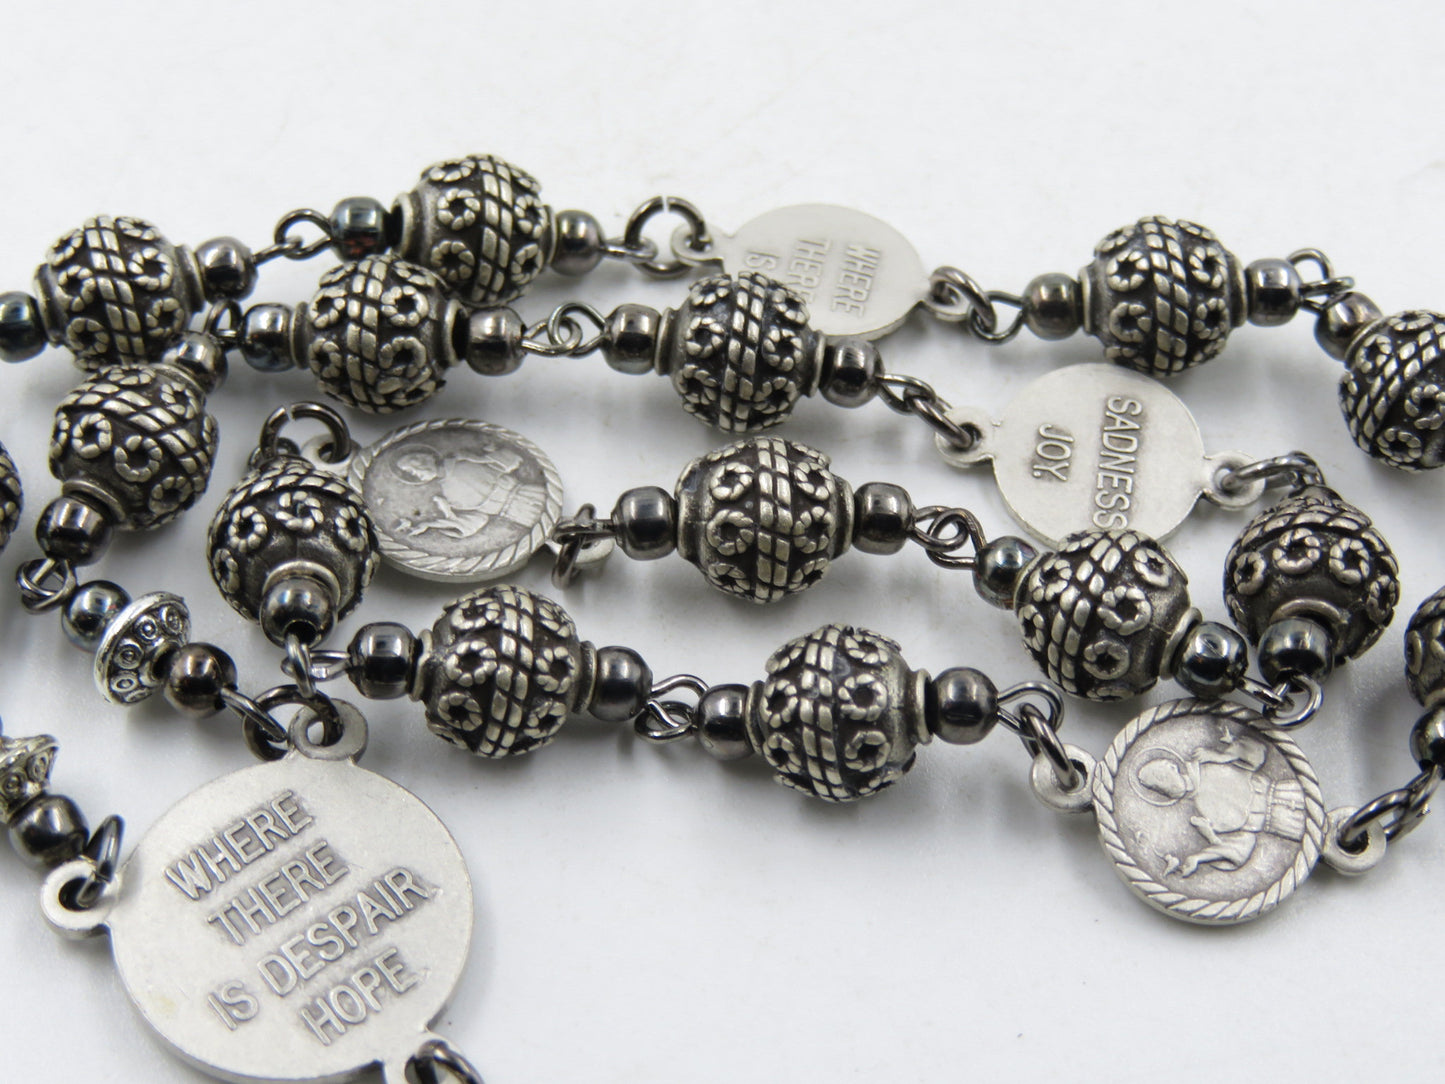 Vintage style Heirloom St Francis Of Assisi prayer Chaplet, St. Francis Crucifix, Vintage rosary, The Blessing Of St. Francis Crucifix.